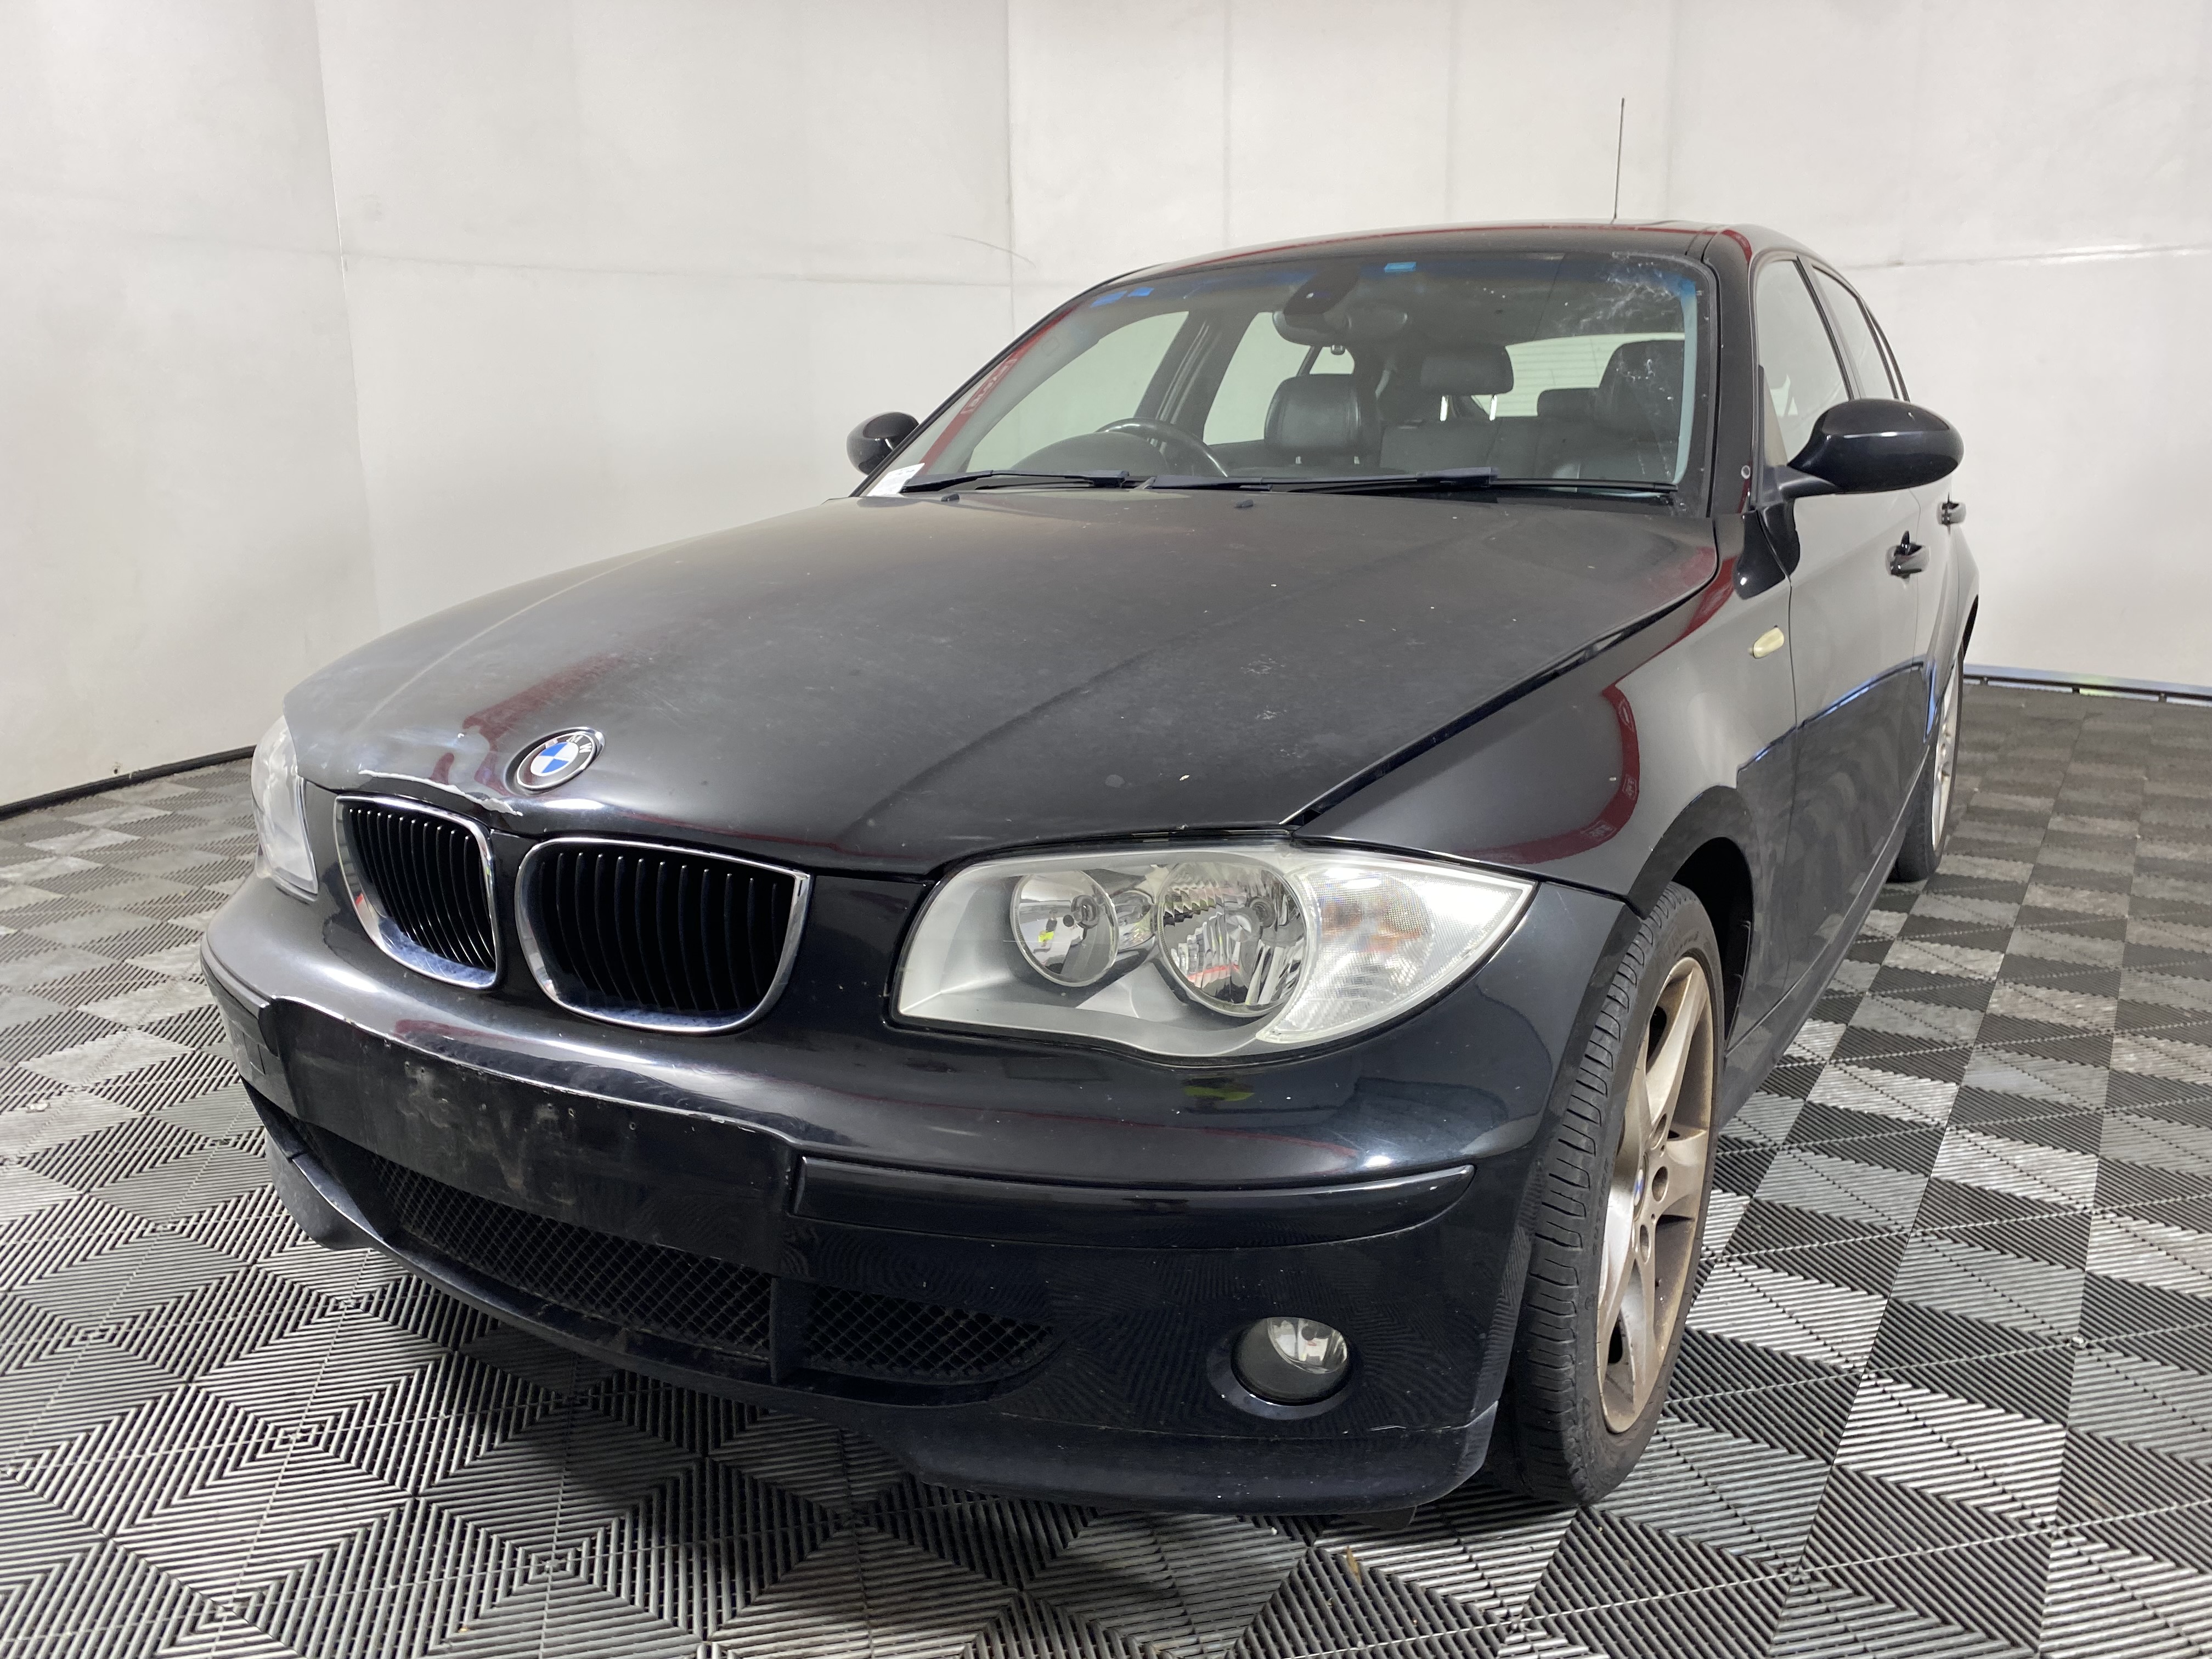 Buyer's Guide: BMW E87 1-Series Hatch (2004-11)